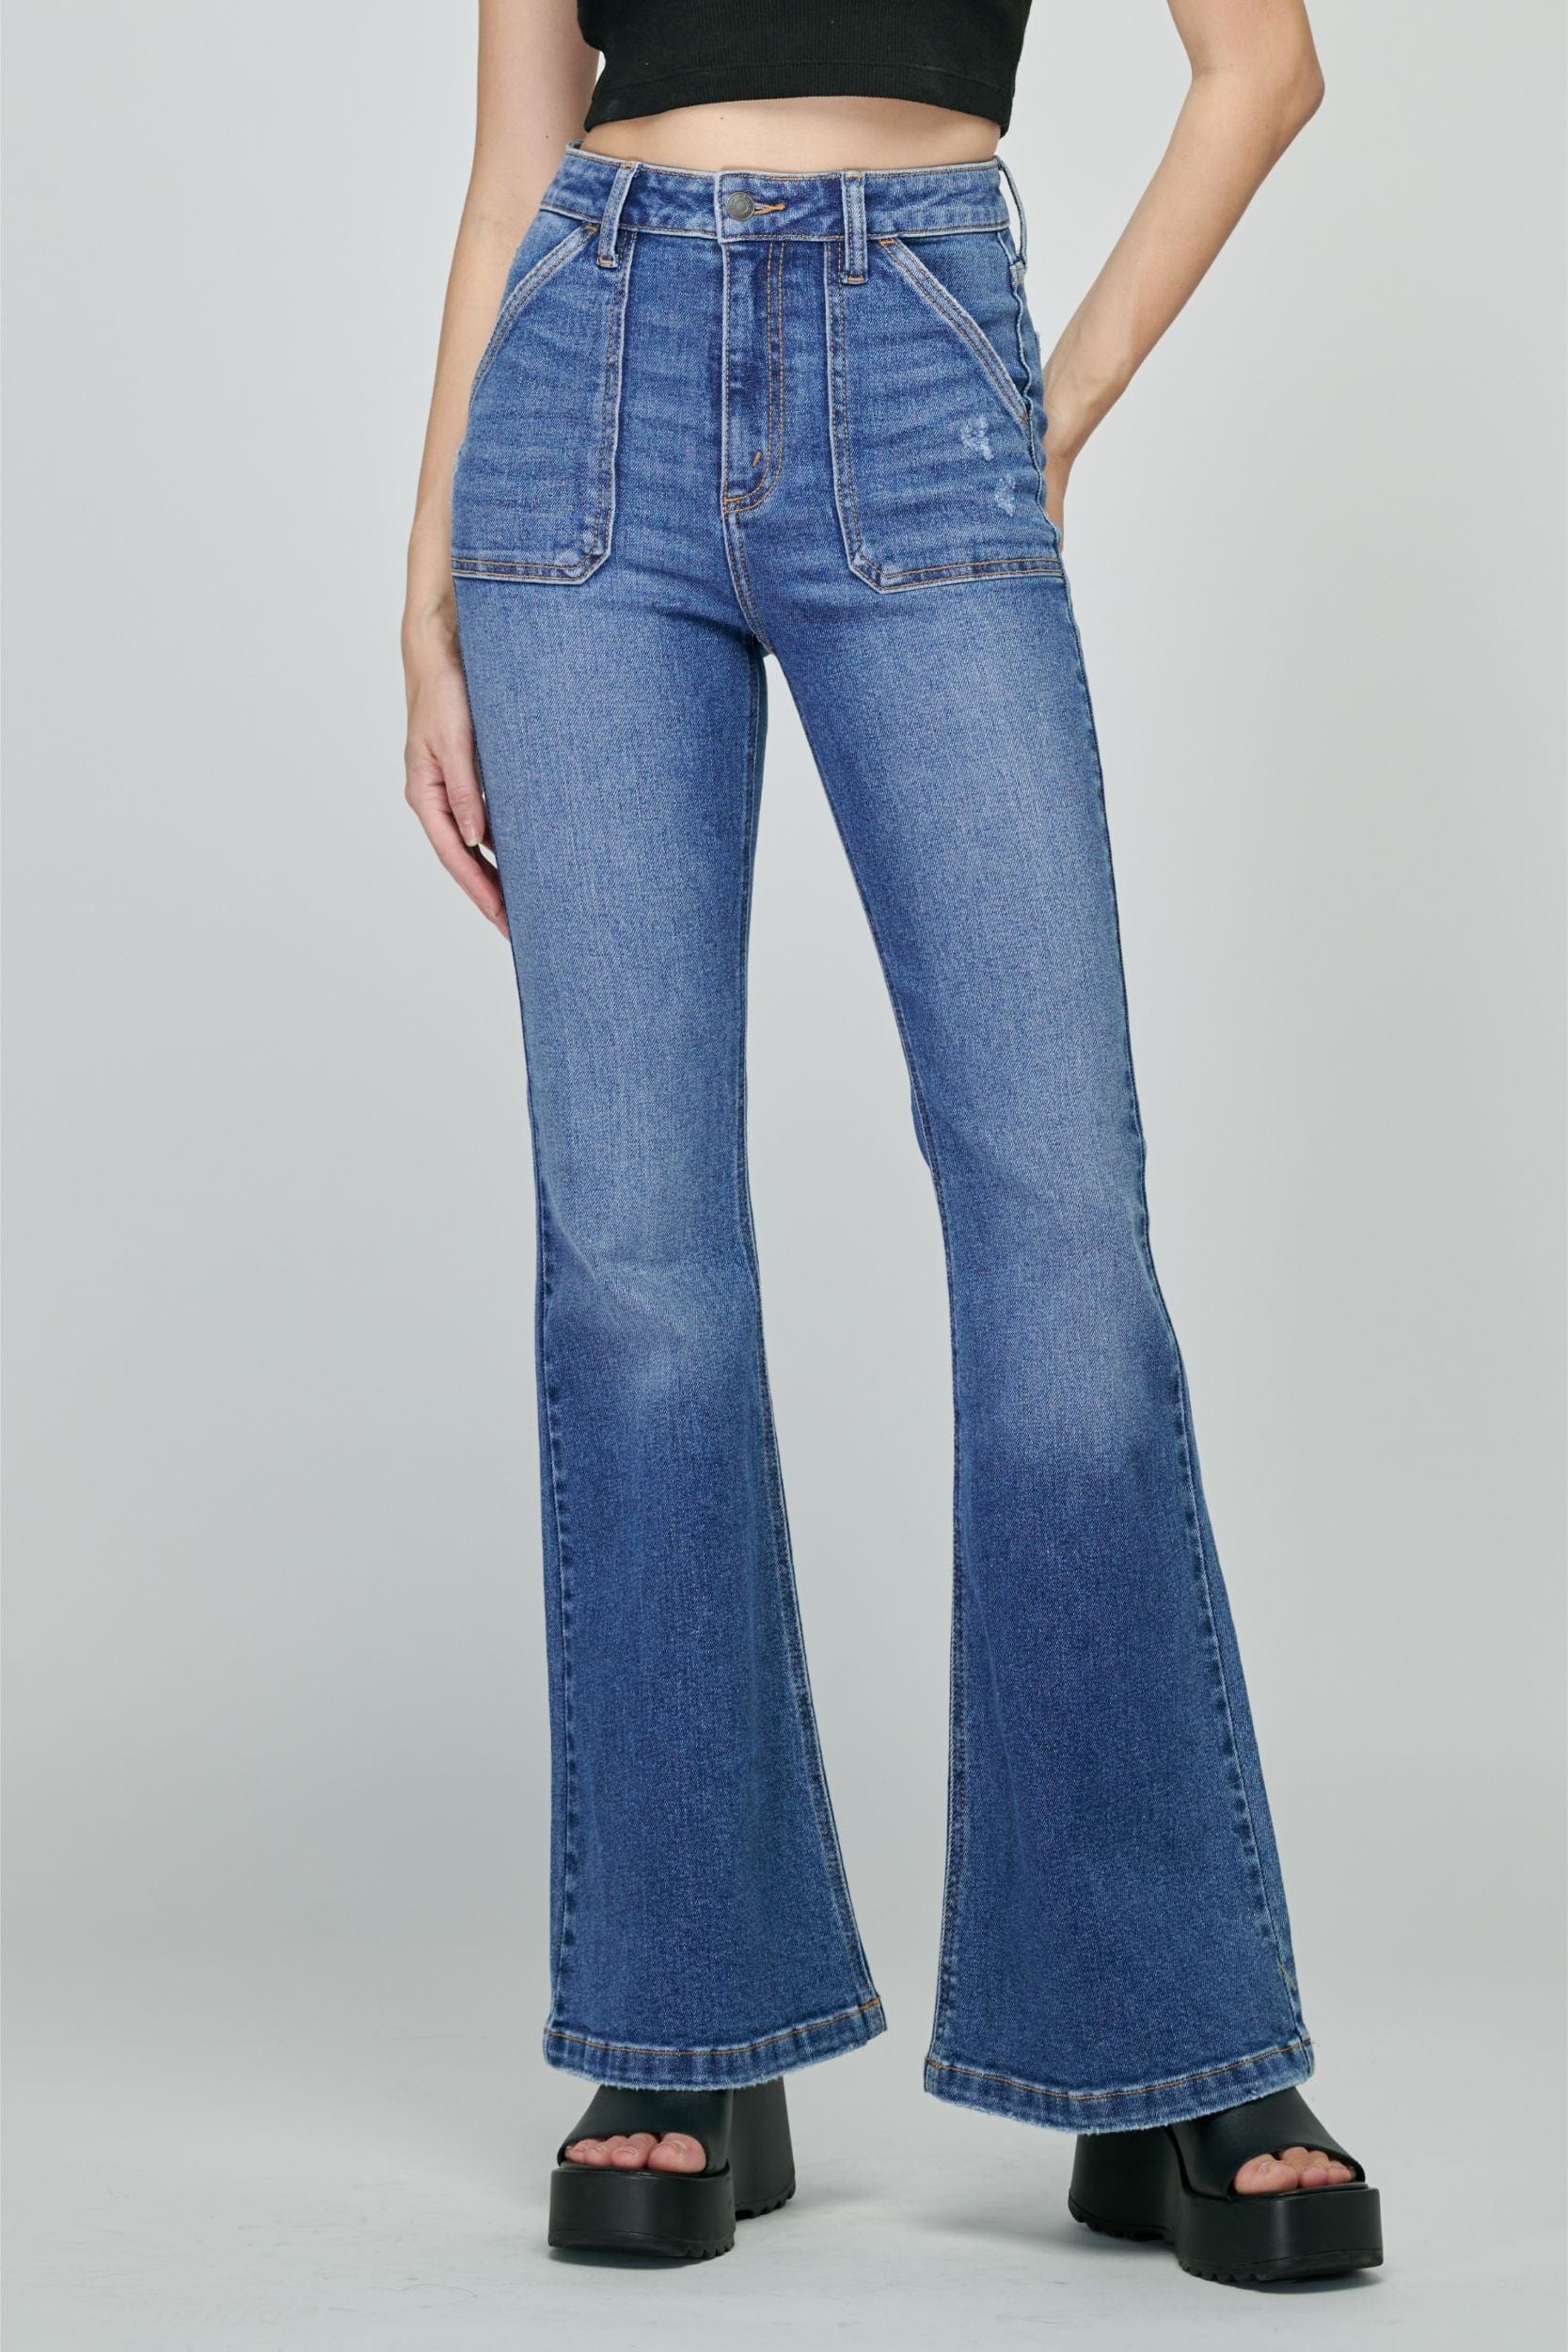 Cello Jeans Cello High Rise Super Flare Jeans with Surplus Pockets - Little Miss Muffin Children & Home